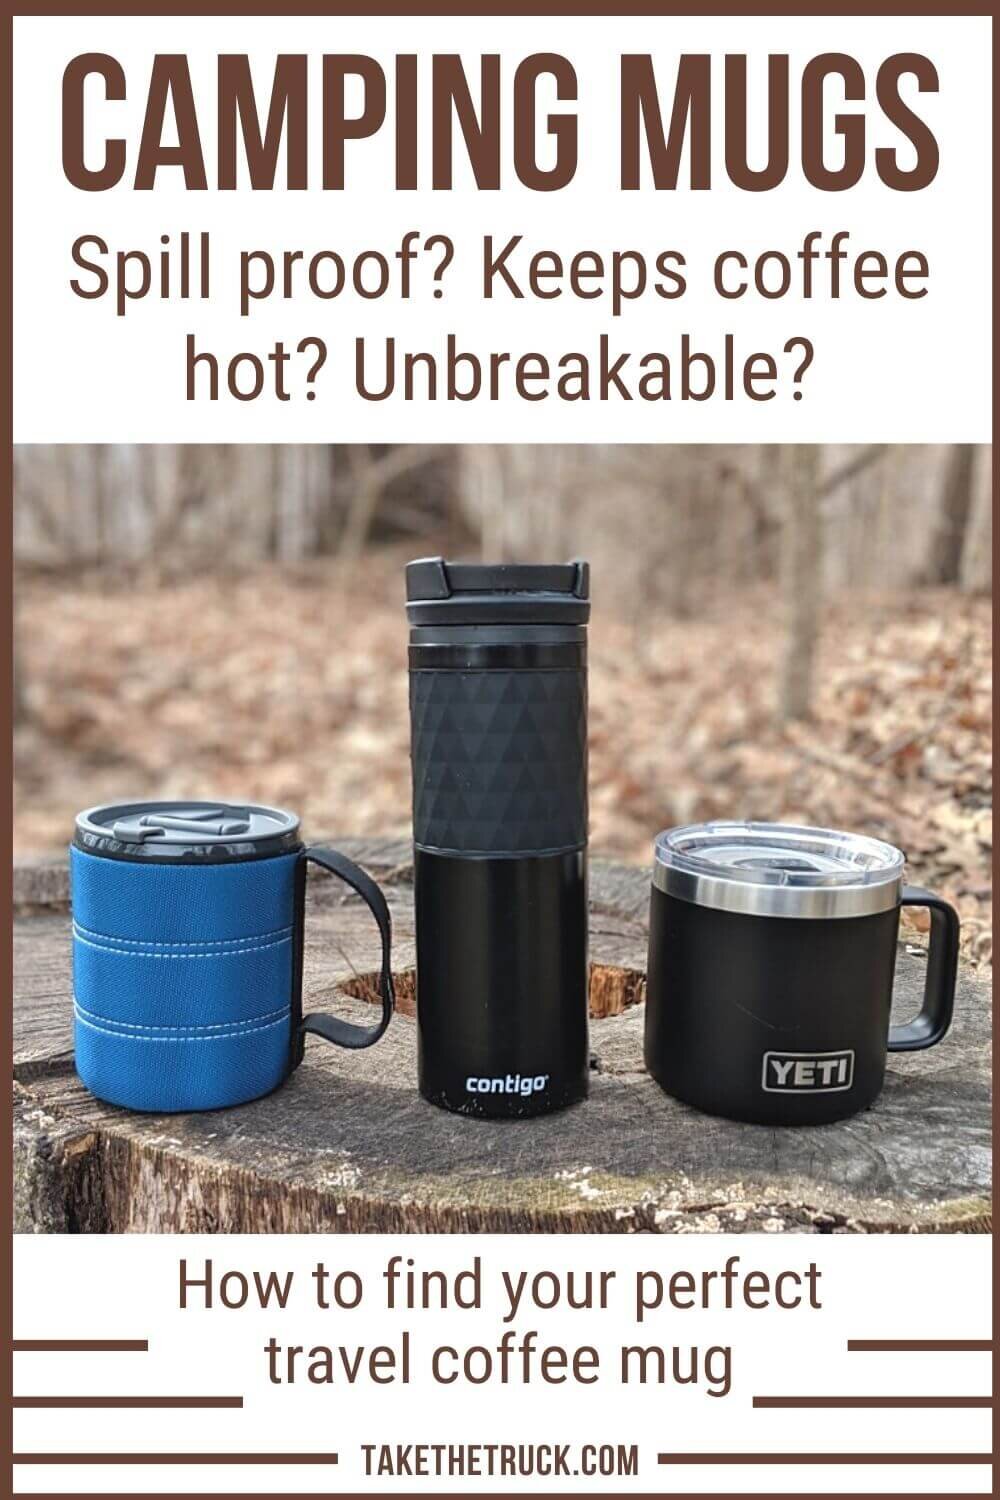 Finally find the best travel coffee mug and best camping mug to keep coffee hot with no spills! We’ve got a simple guide for choosing the best camping coffee mug plus our top three product picks.